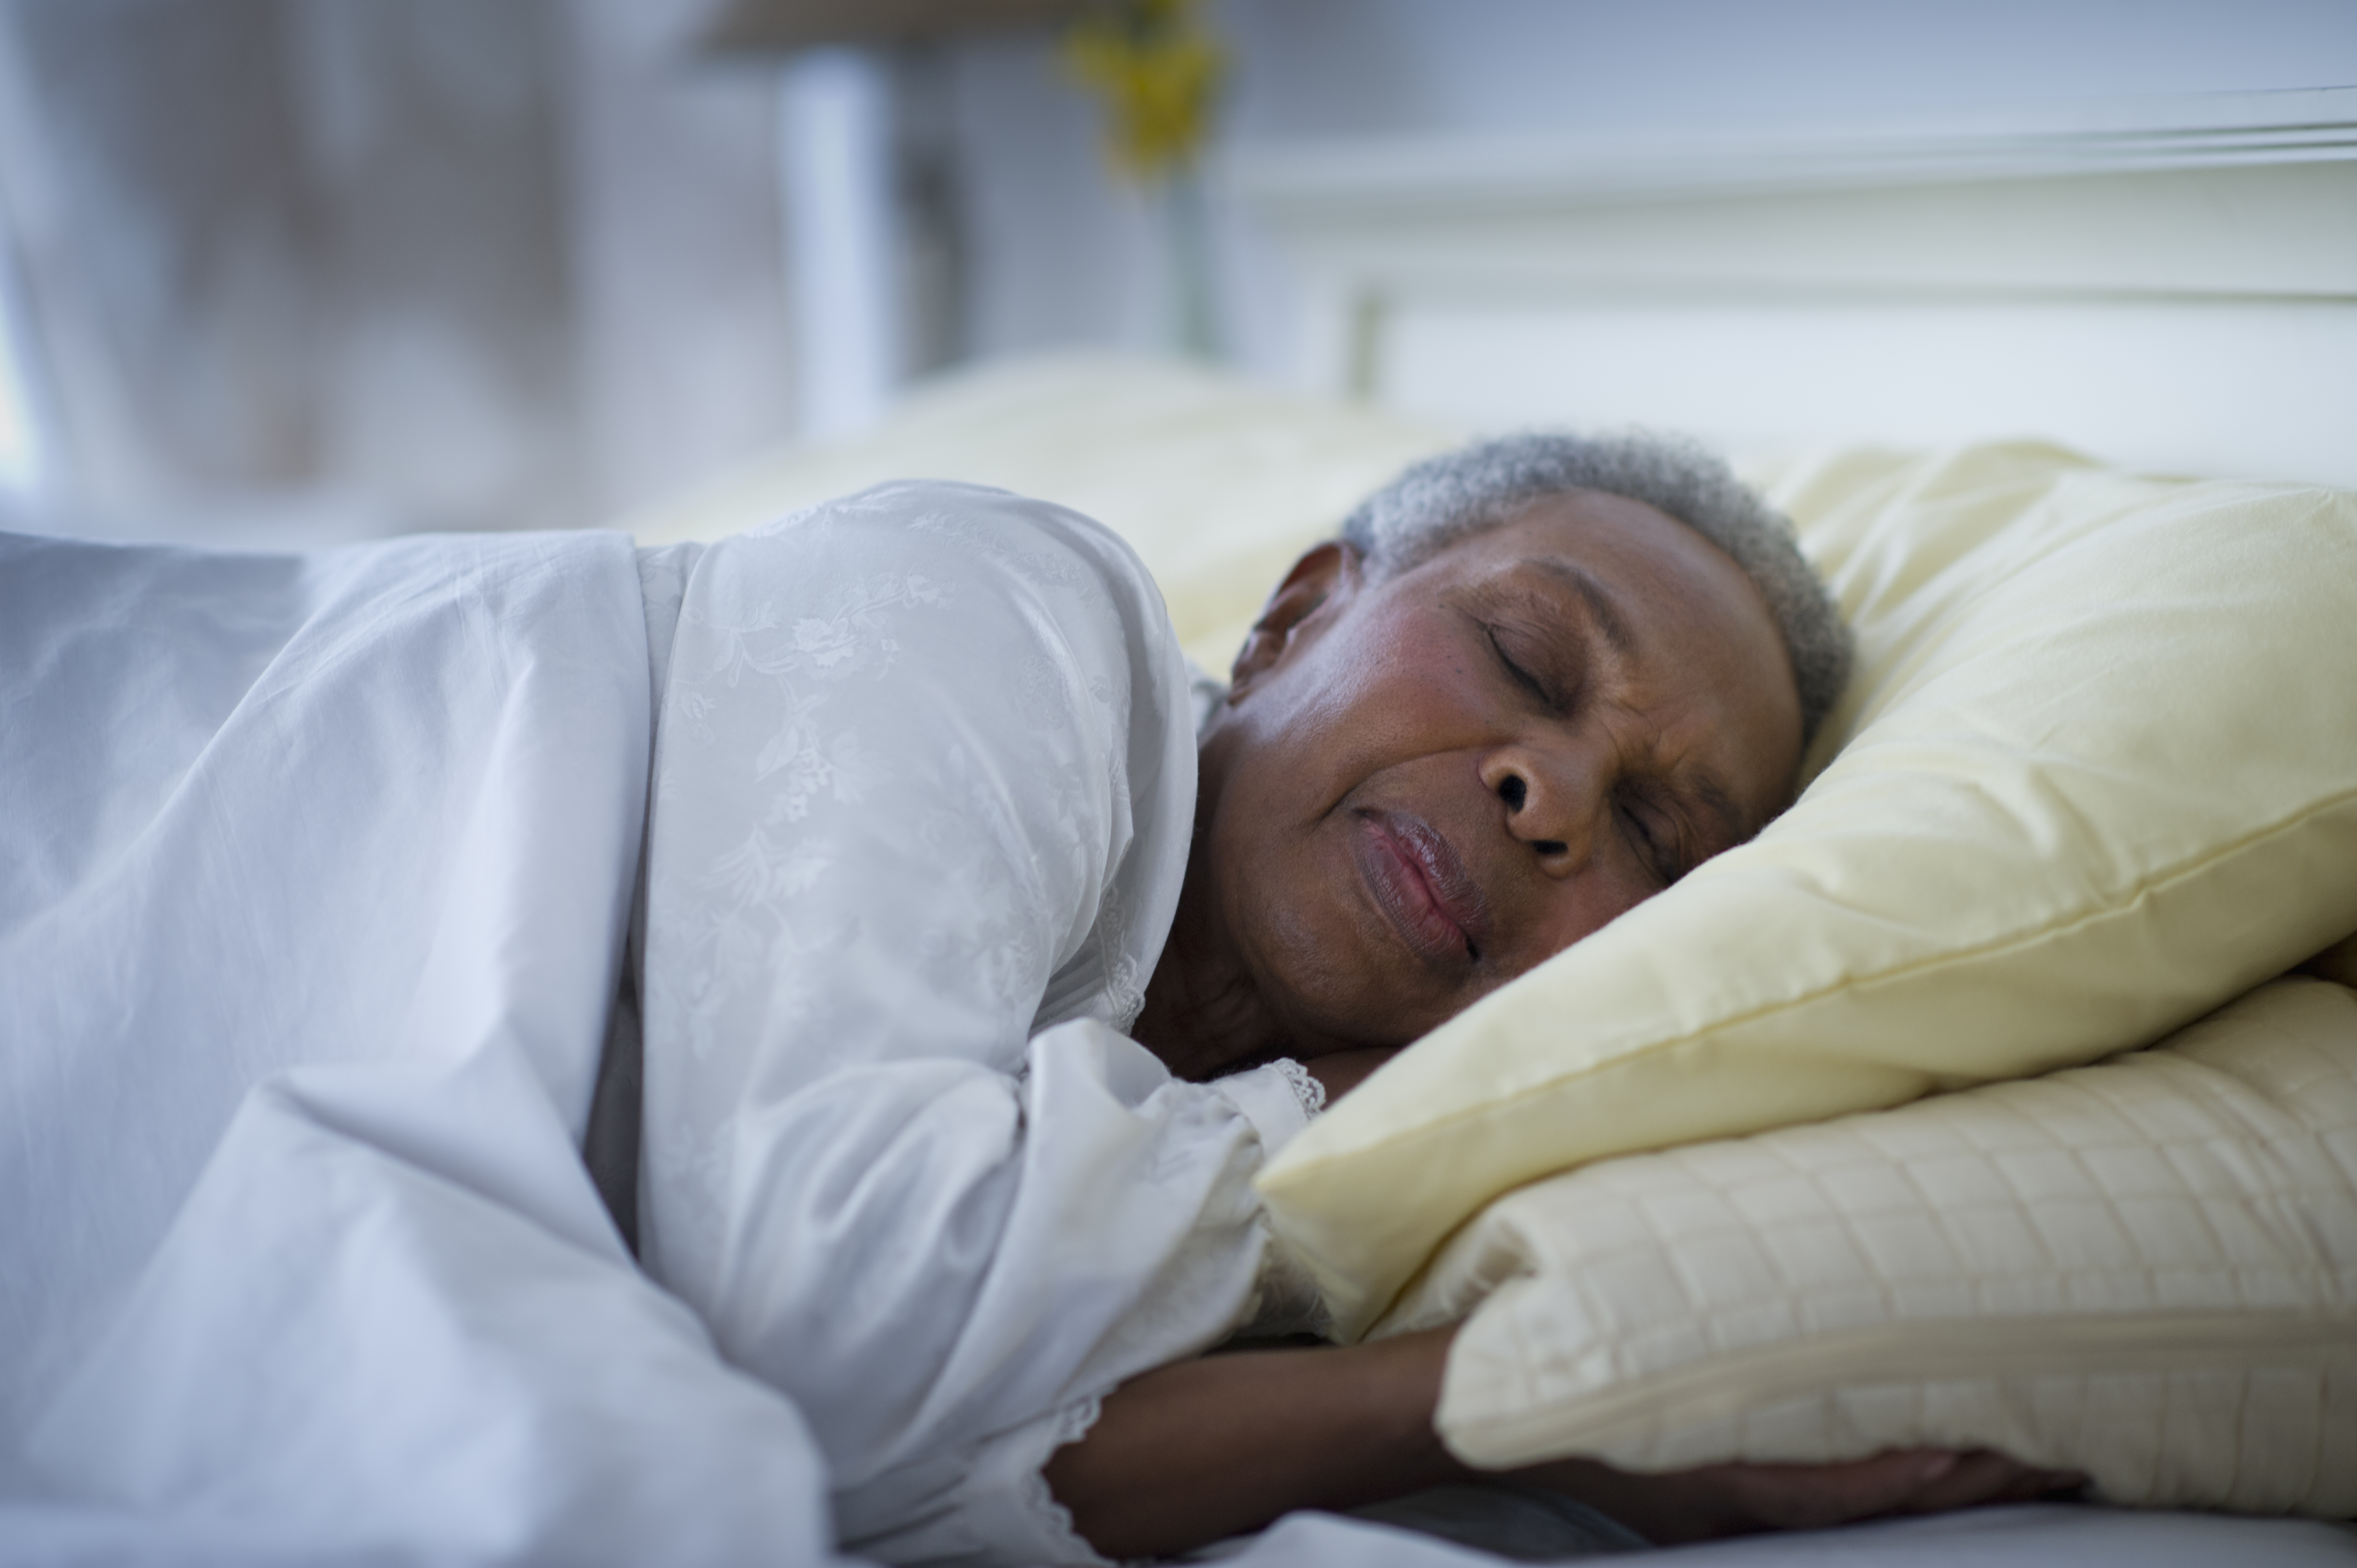 How to Prevent Hip Pain When Sleeping